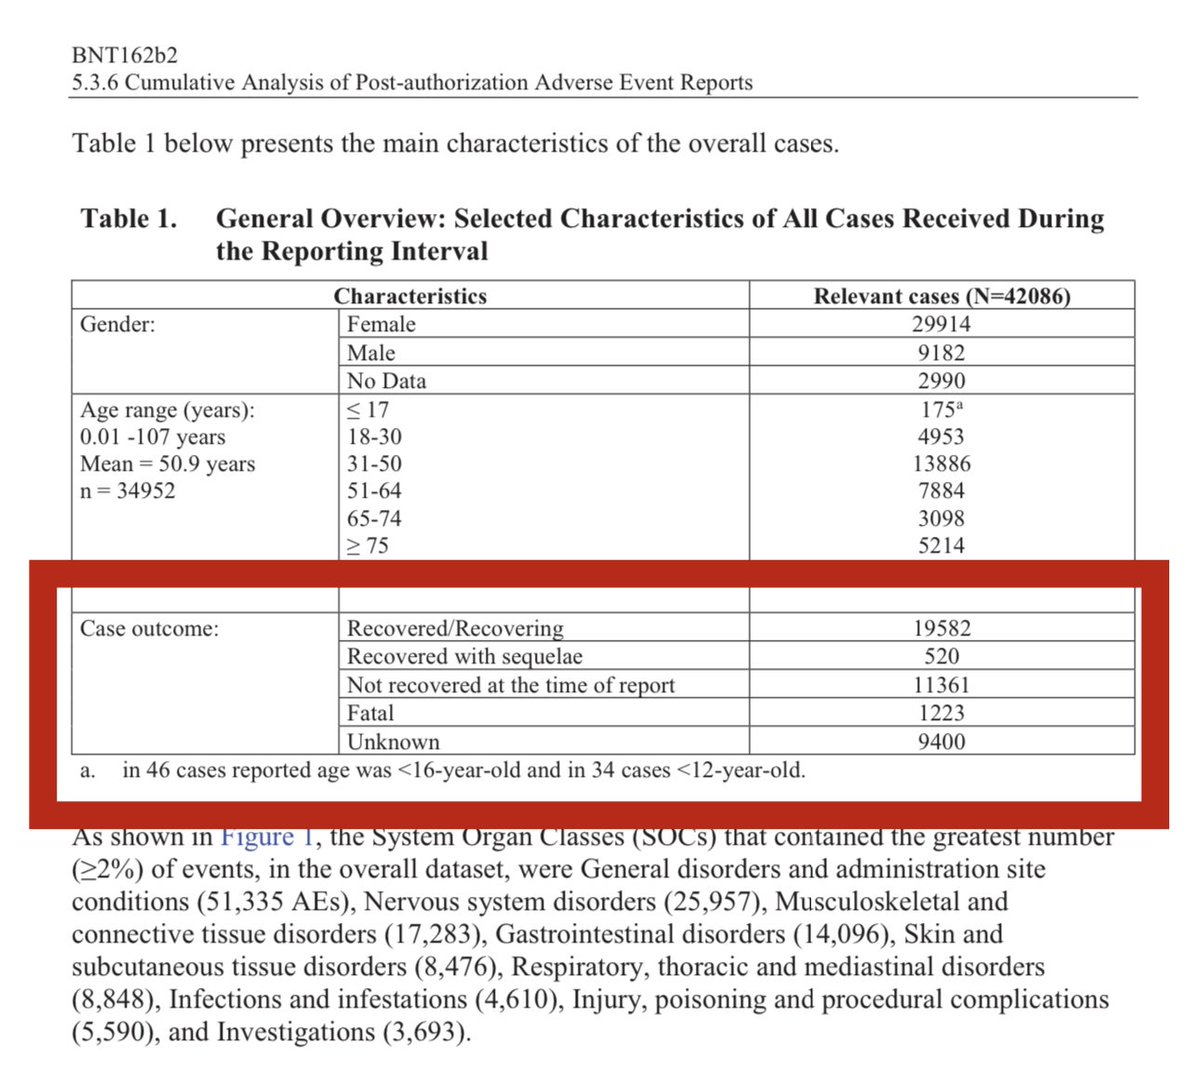 Cumulative Analysis of Post-autherization Adverse Events Reports